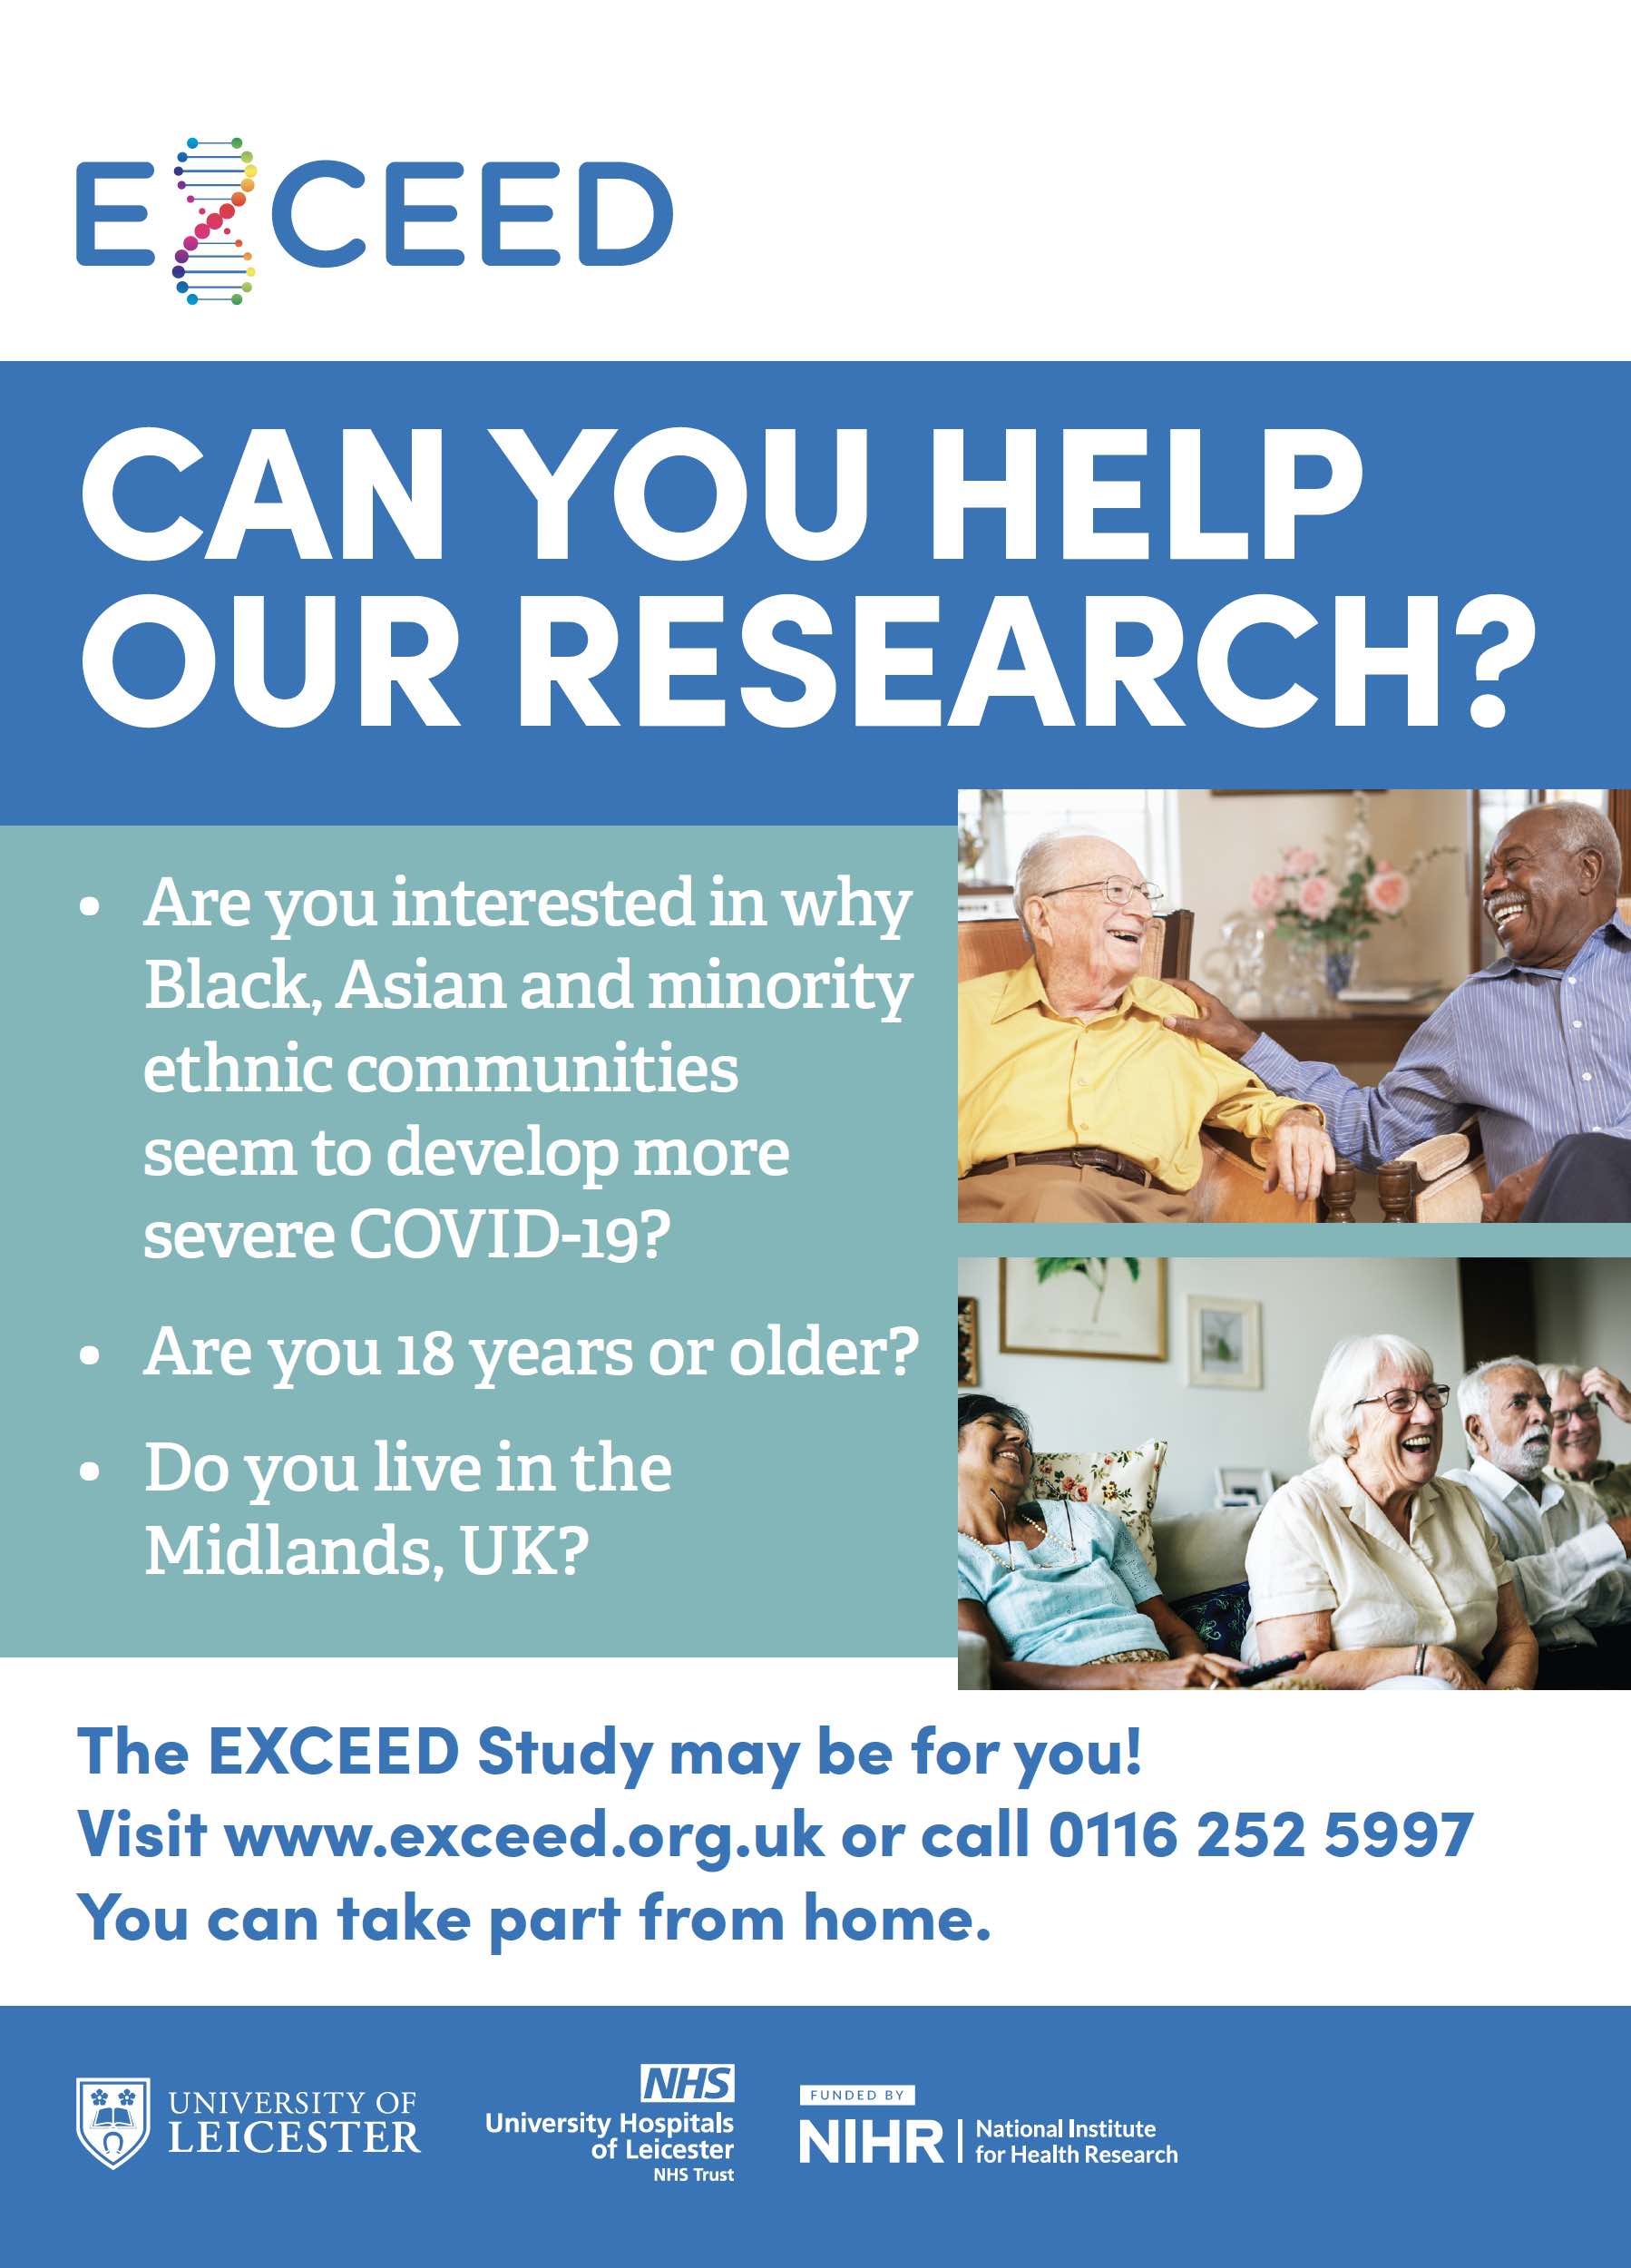 Exceed. Can you help our research? Poster